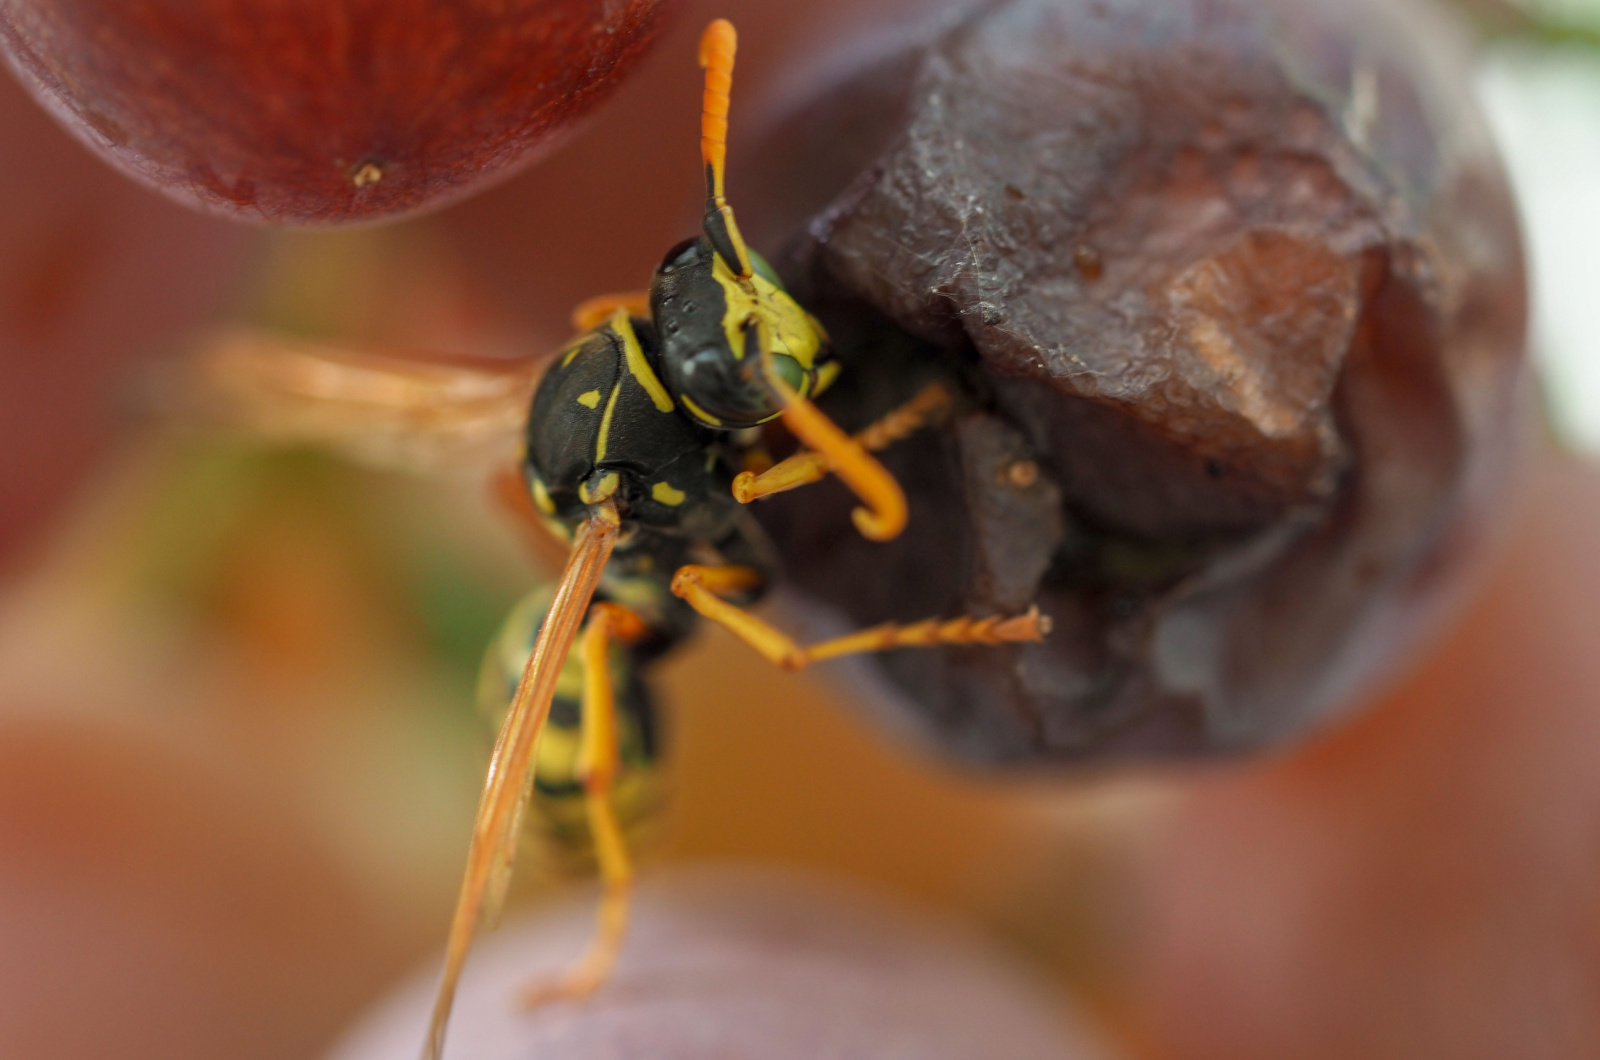 pests on the Grapes